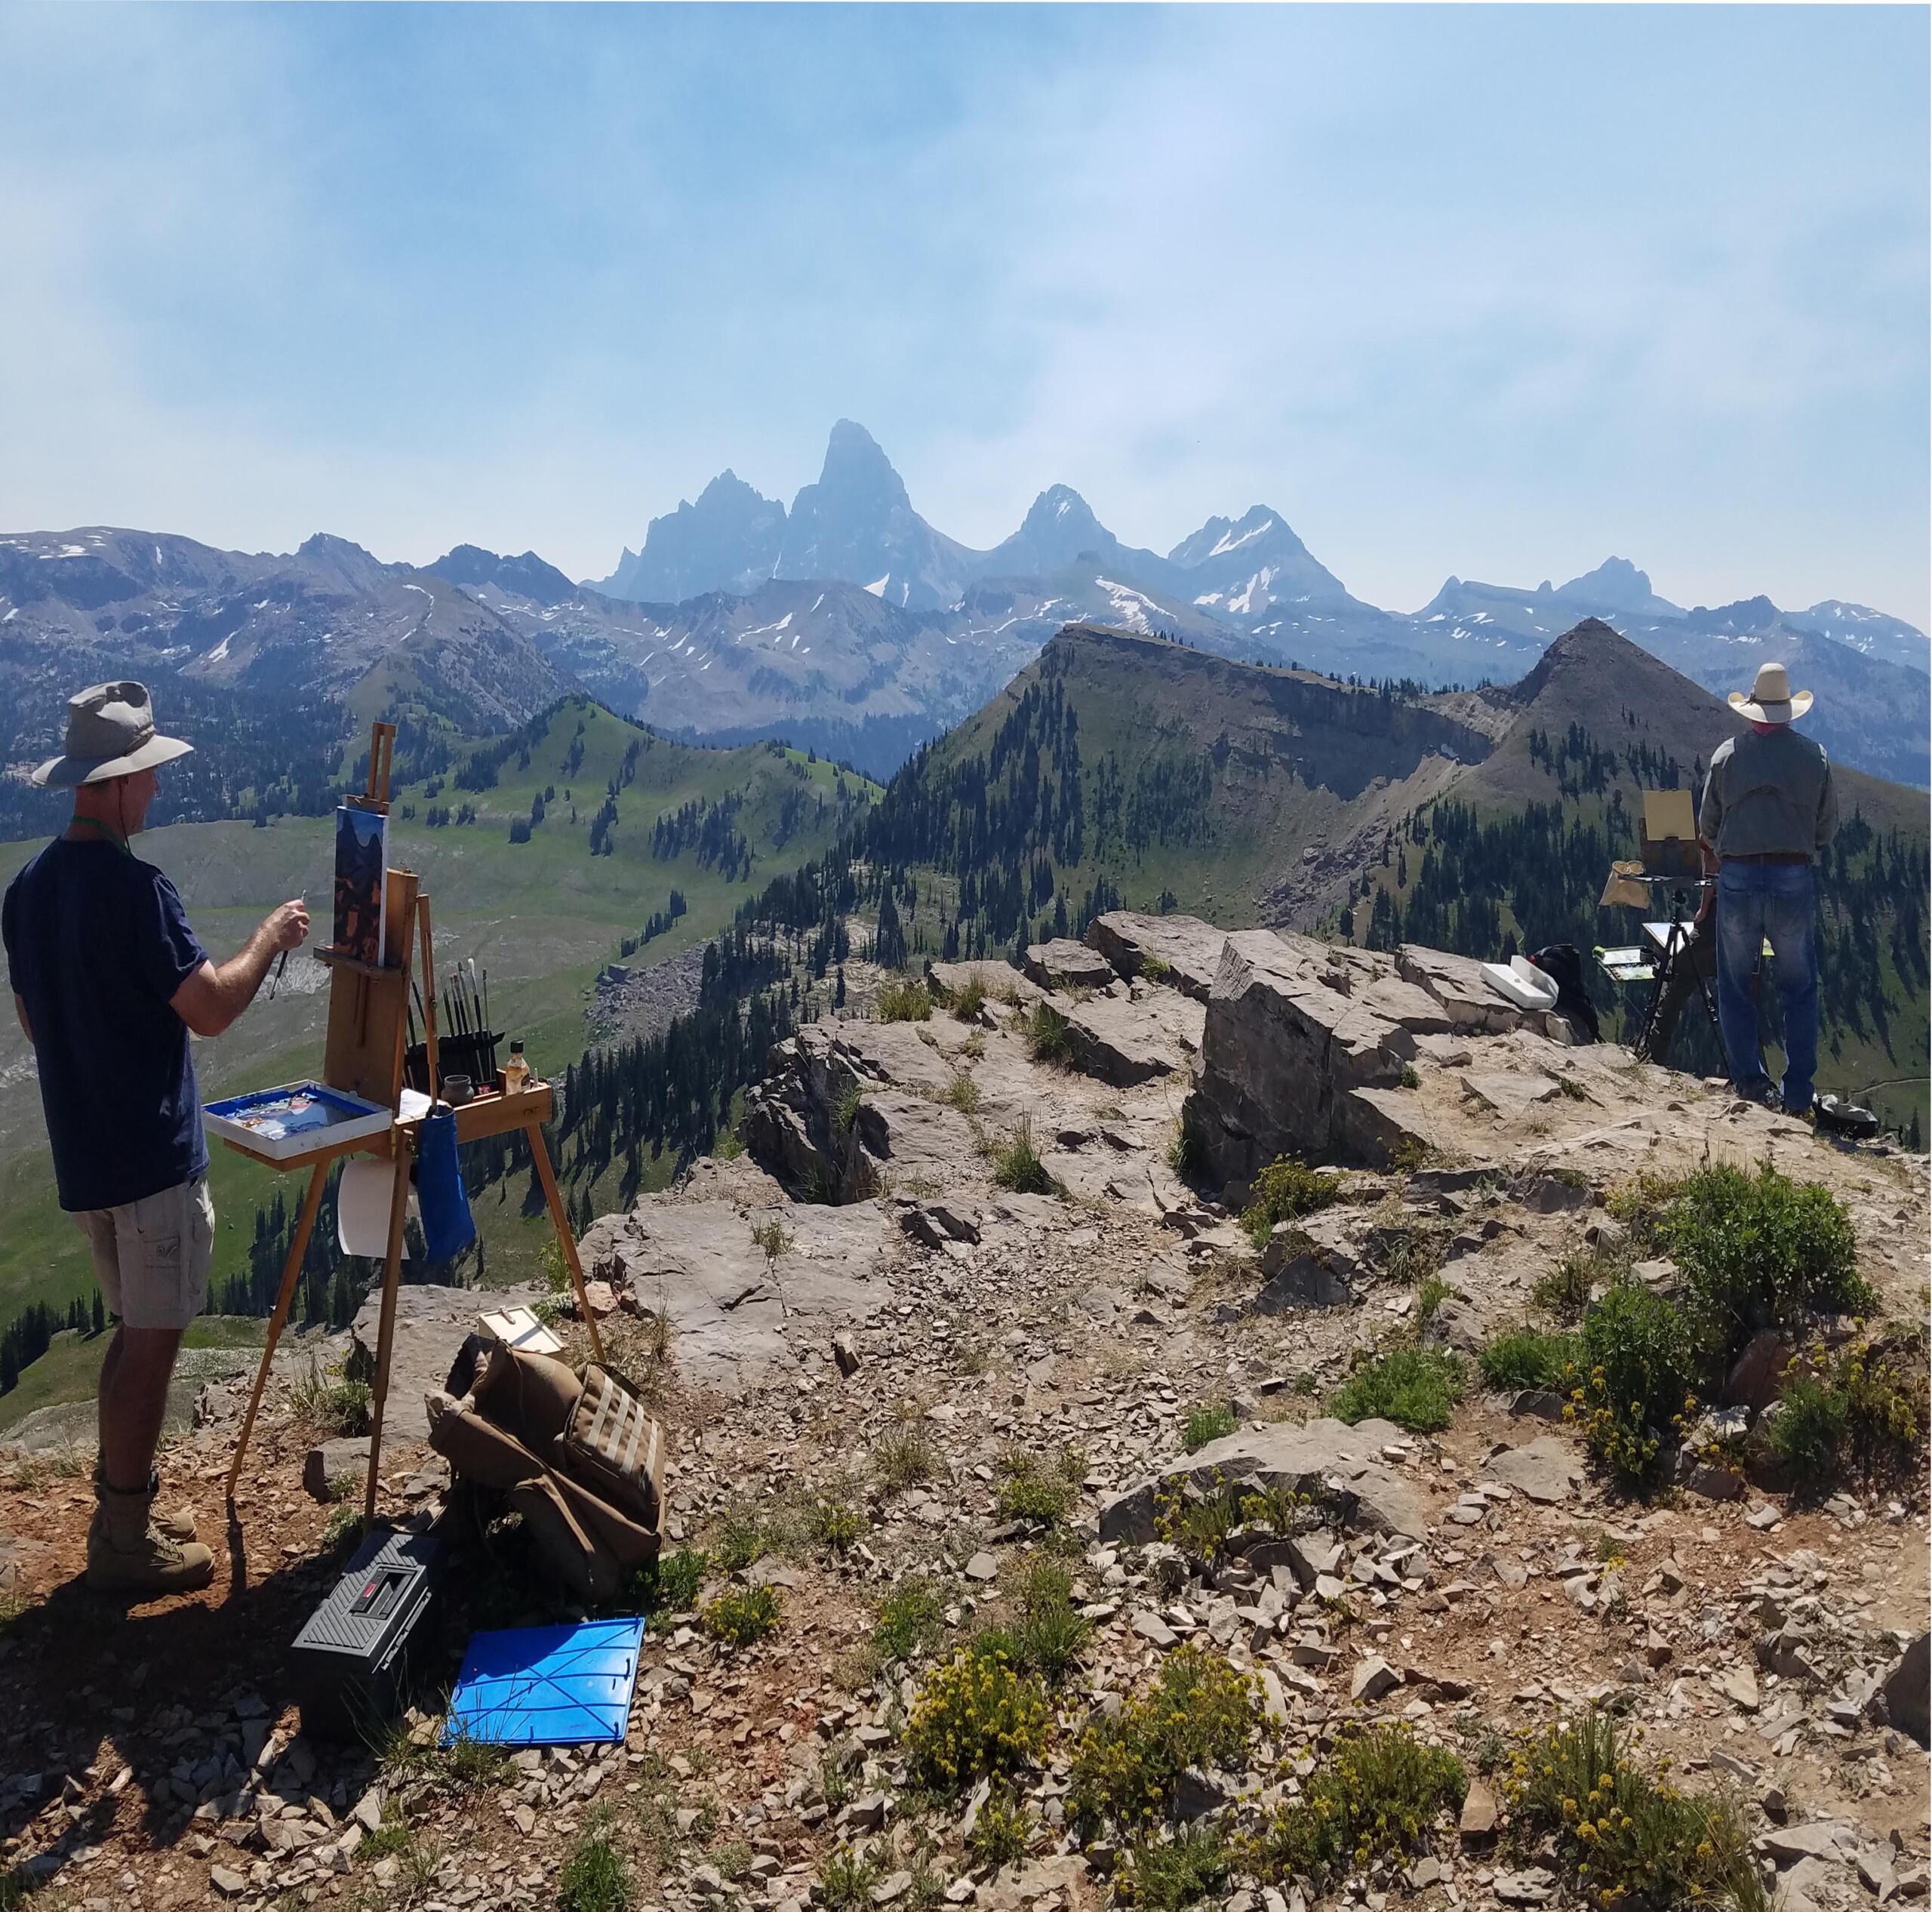 Artists painting on a cliffside the Teton mountains.